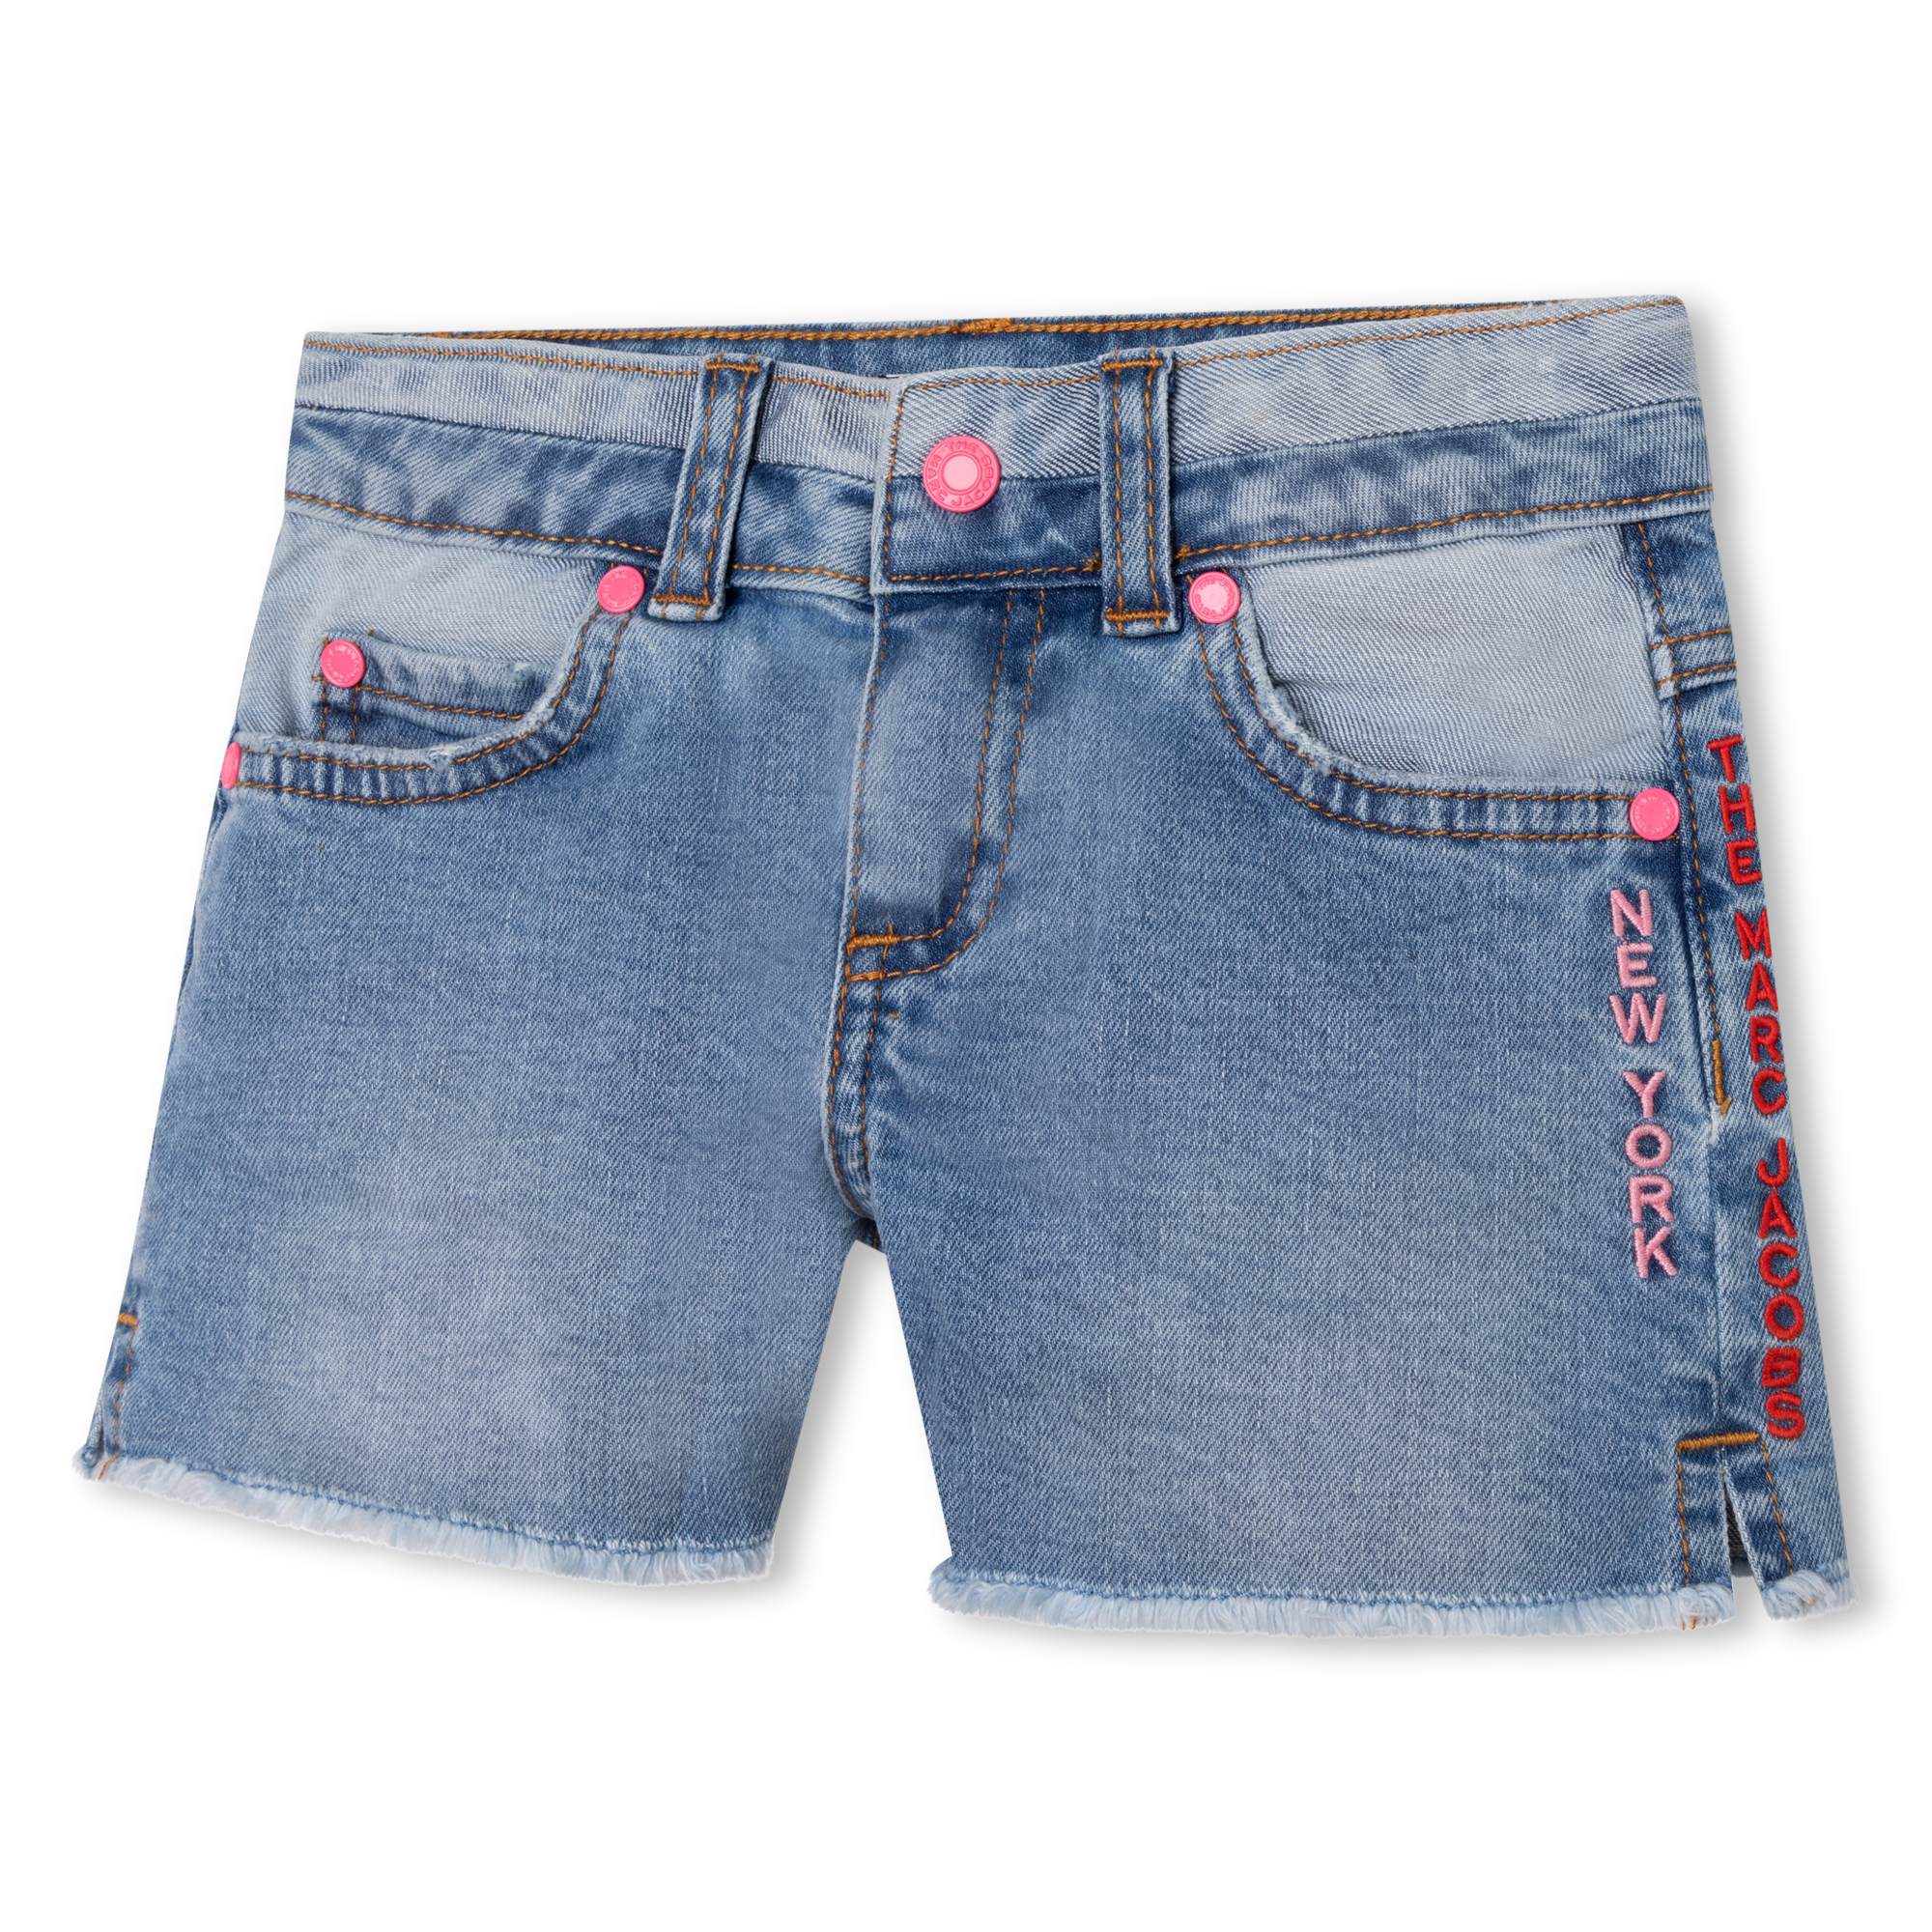 Fringed jean shorts MARC JACOBS for GIRL